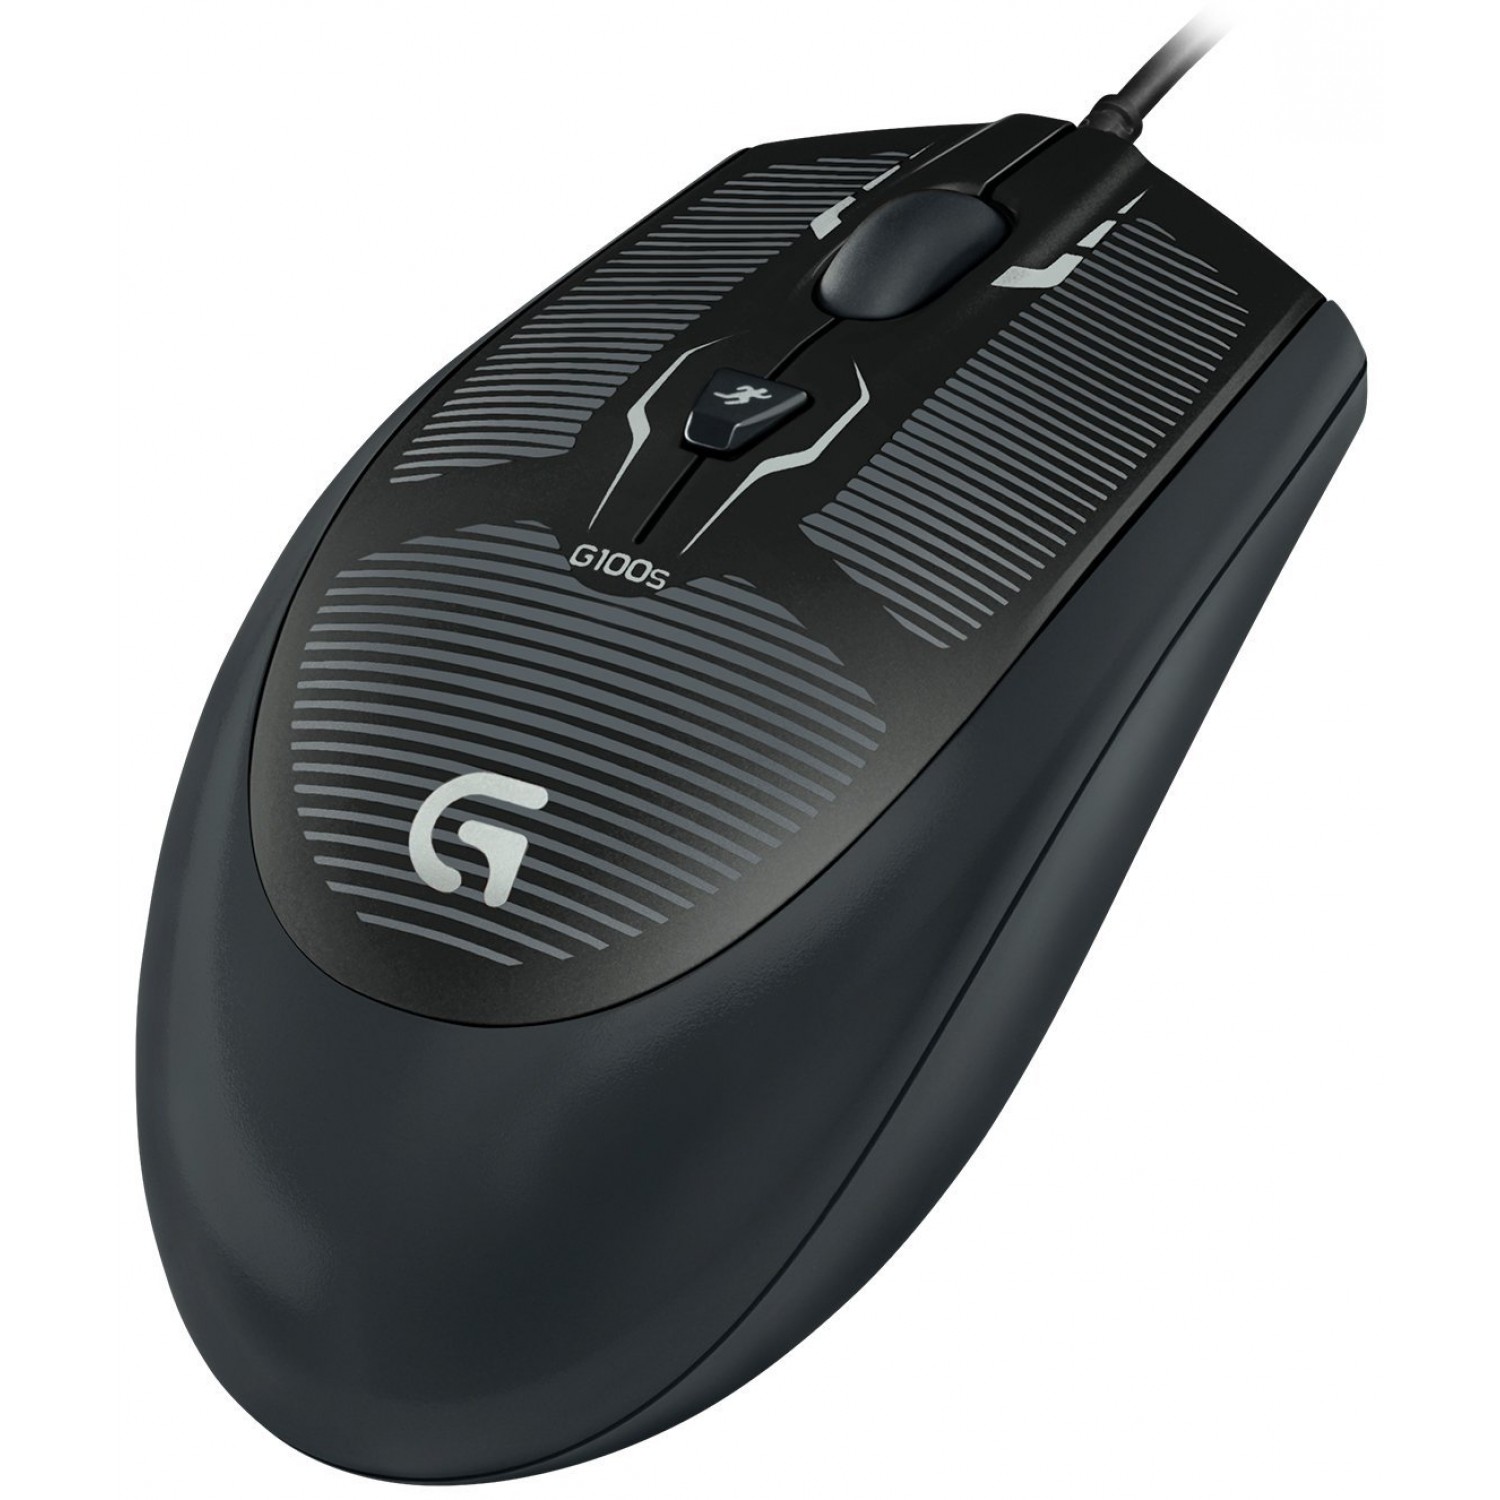 Logitech G100s Gaming Mouse-4